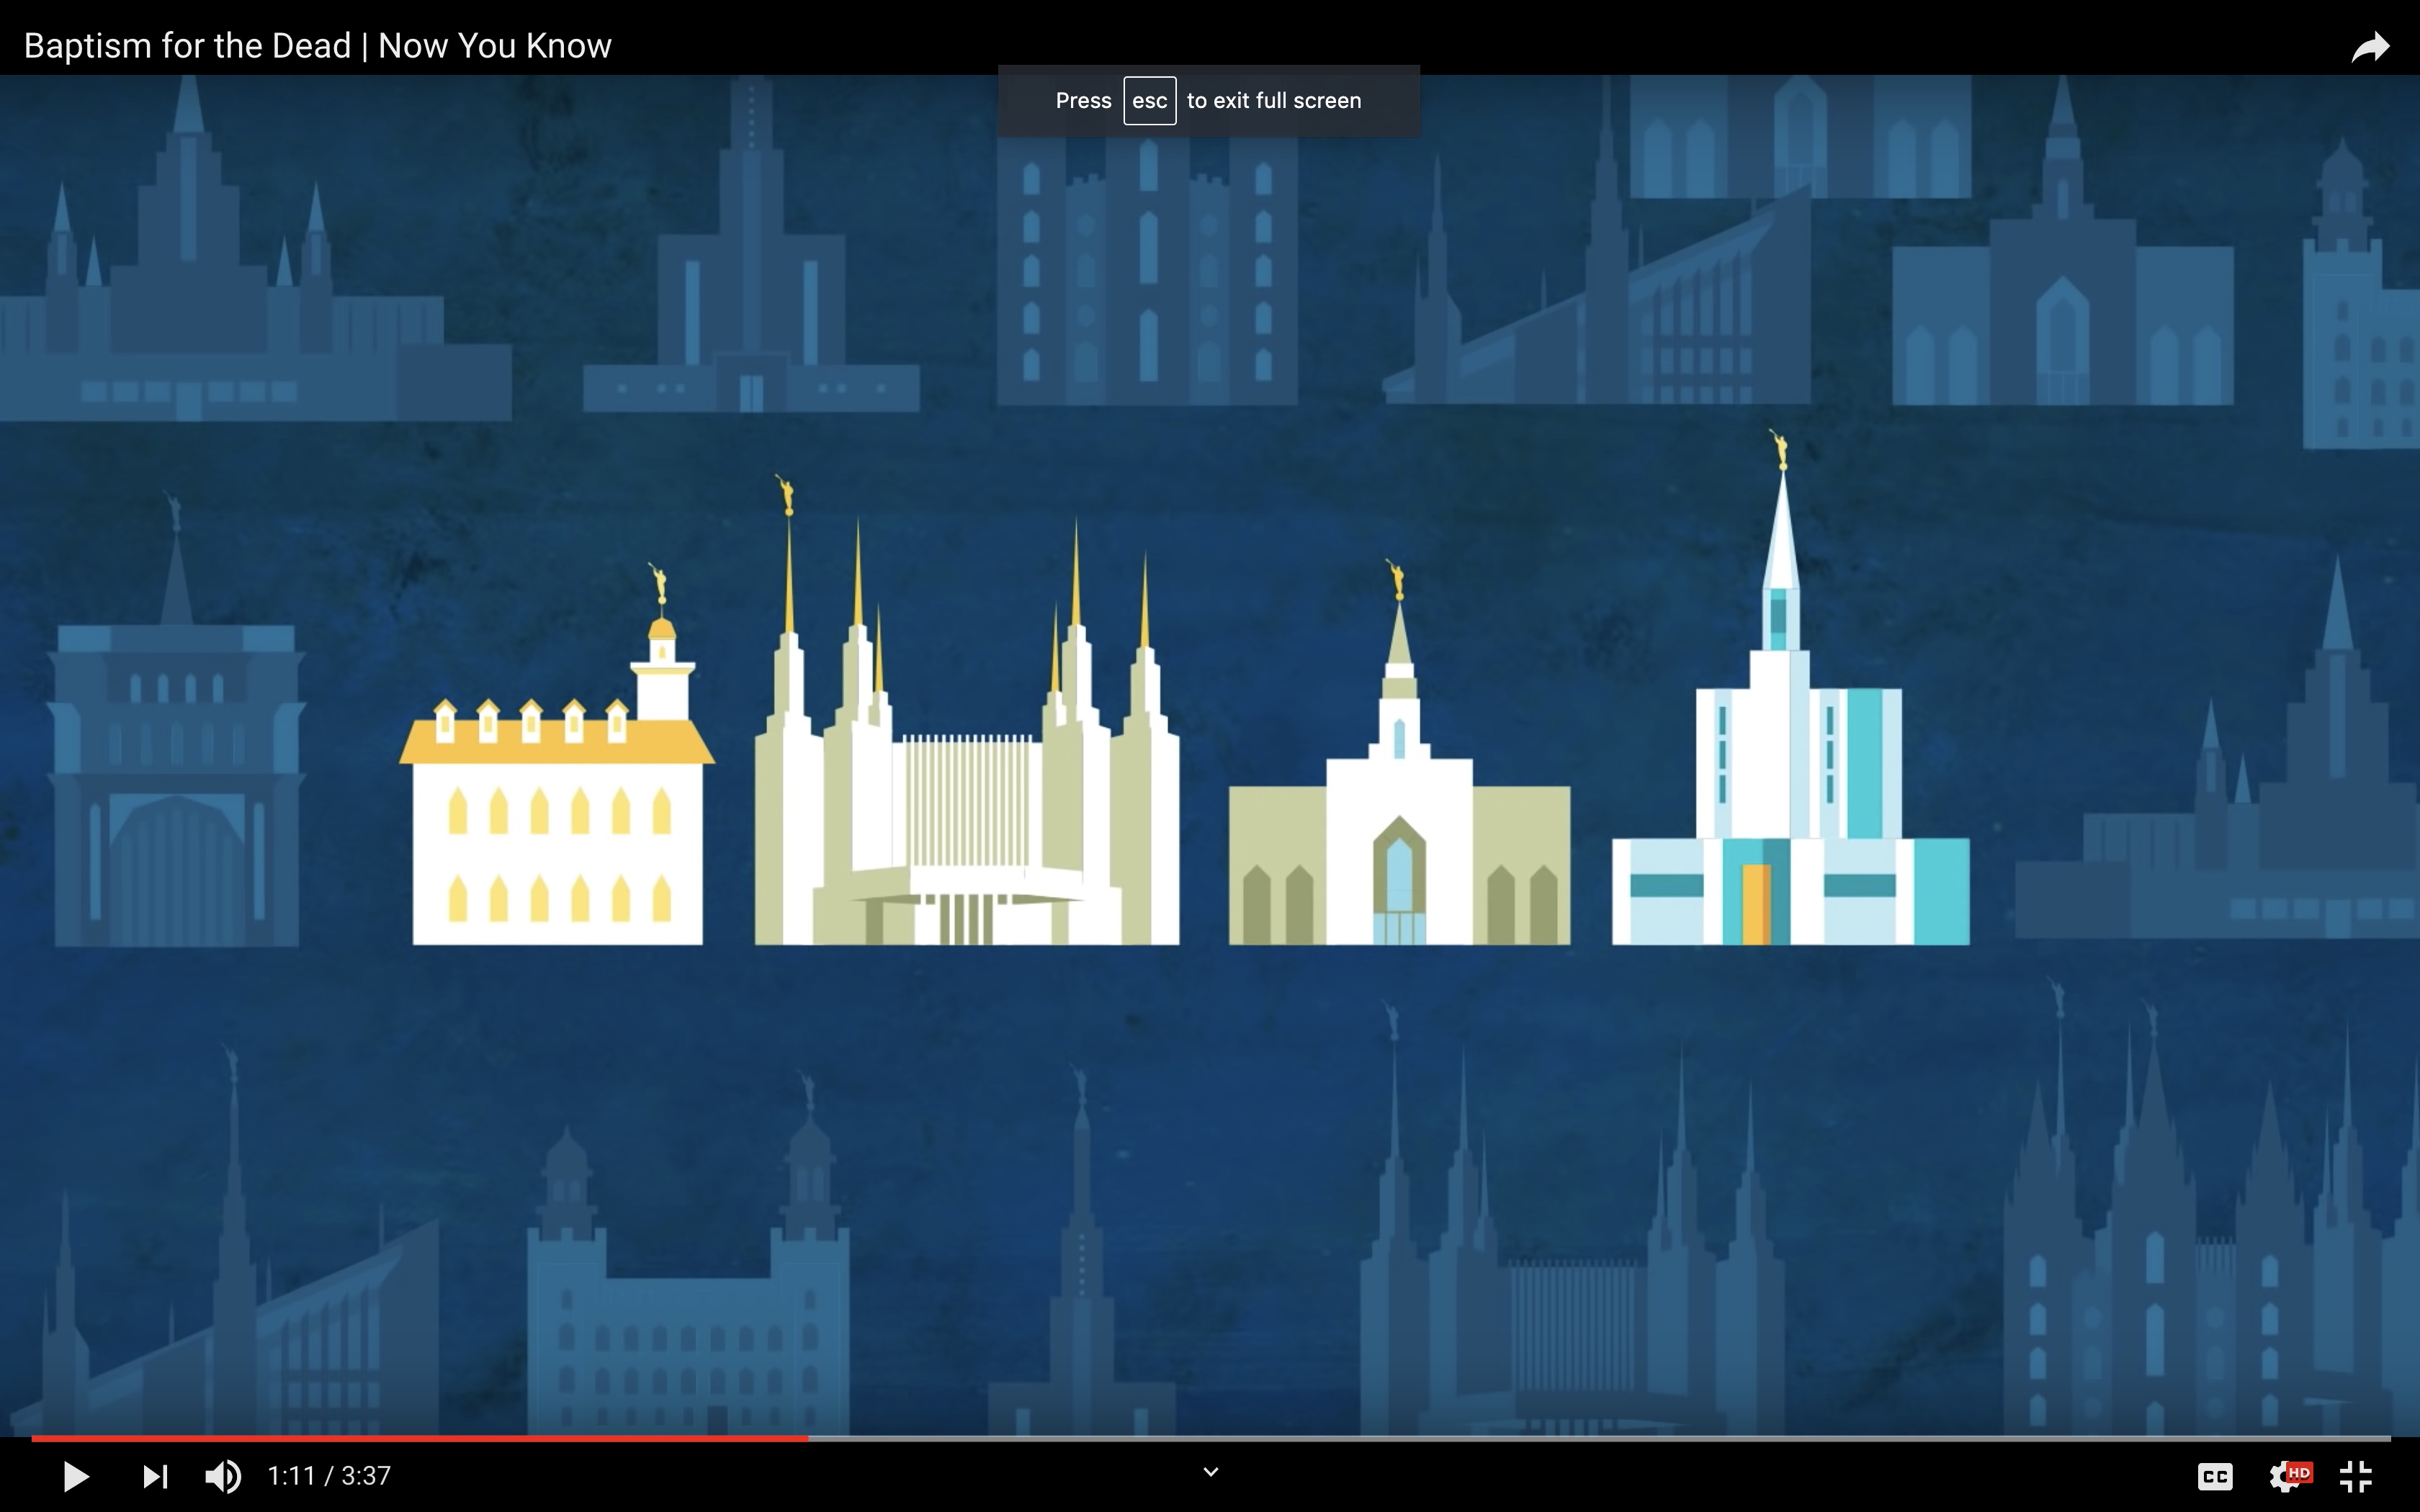 Mormon Temples: Temples of The Church of Jesus Christ of Latter-day Saints